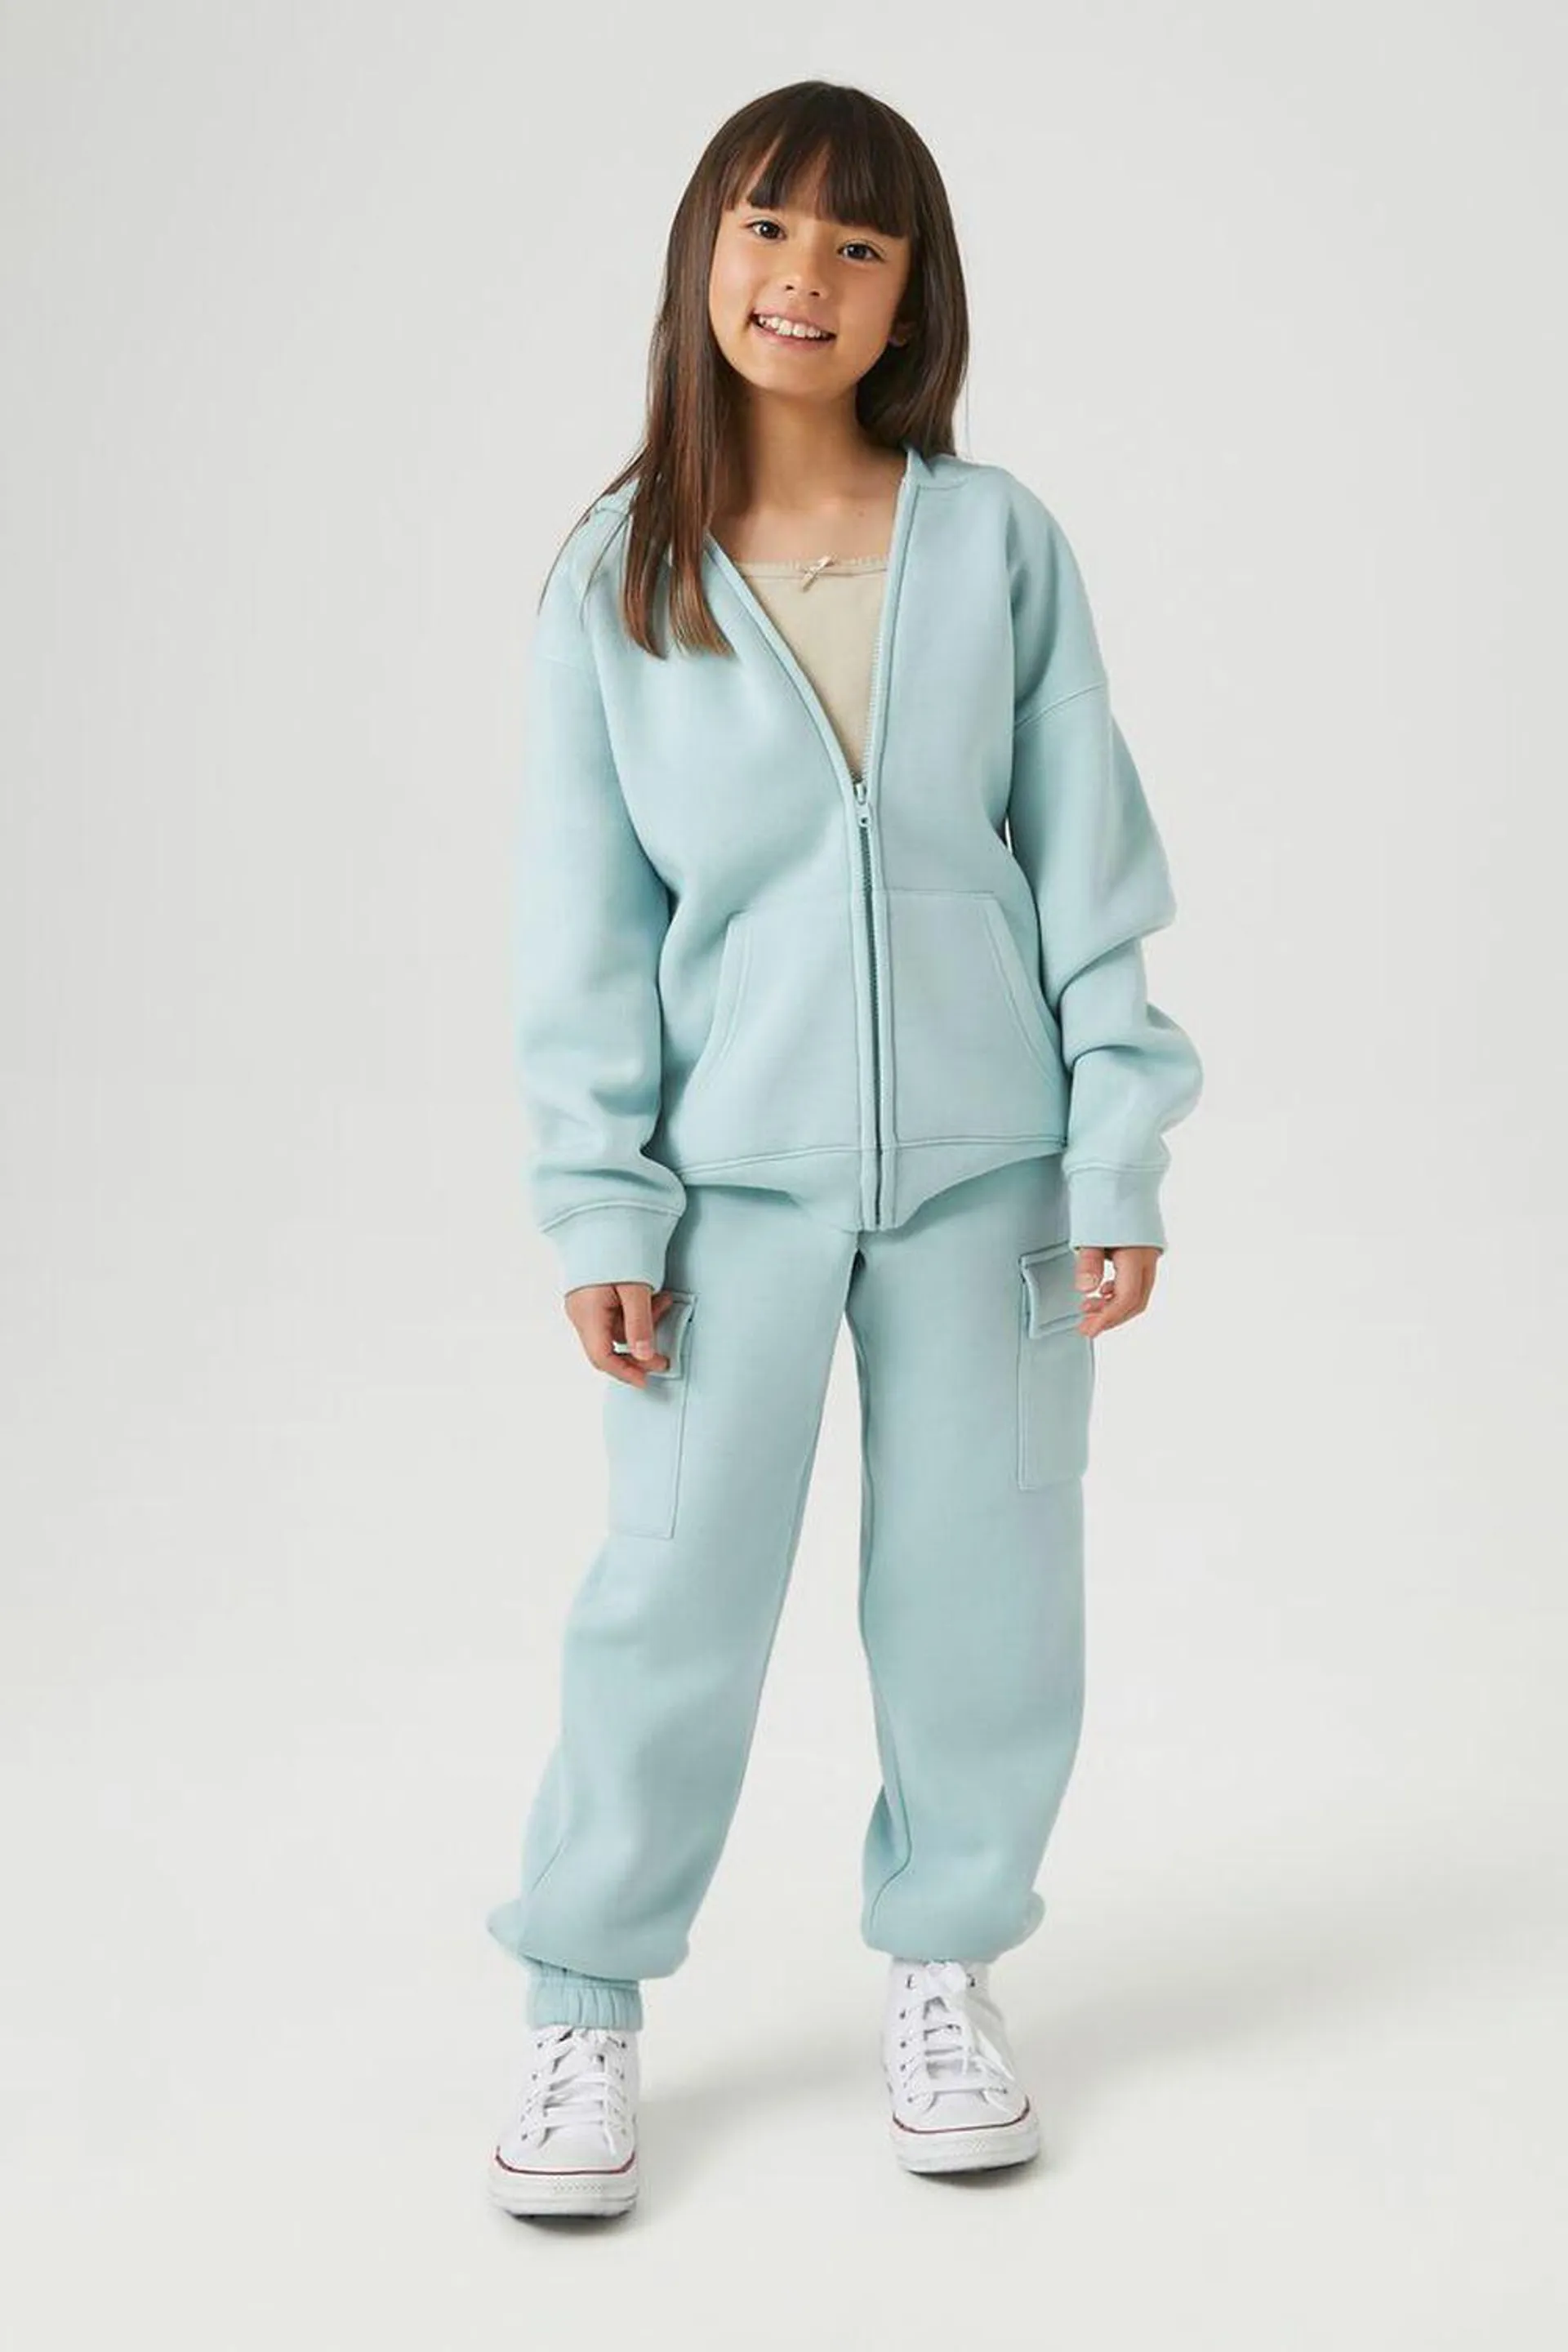 Kids Lounge Outfit (Girls + Boys)